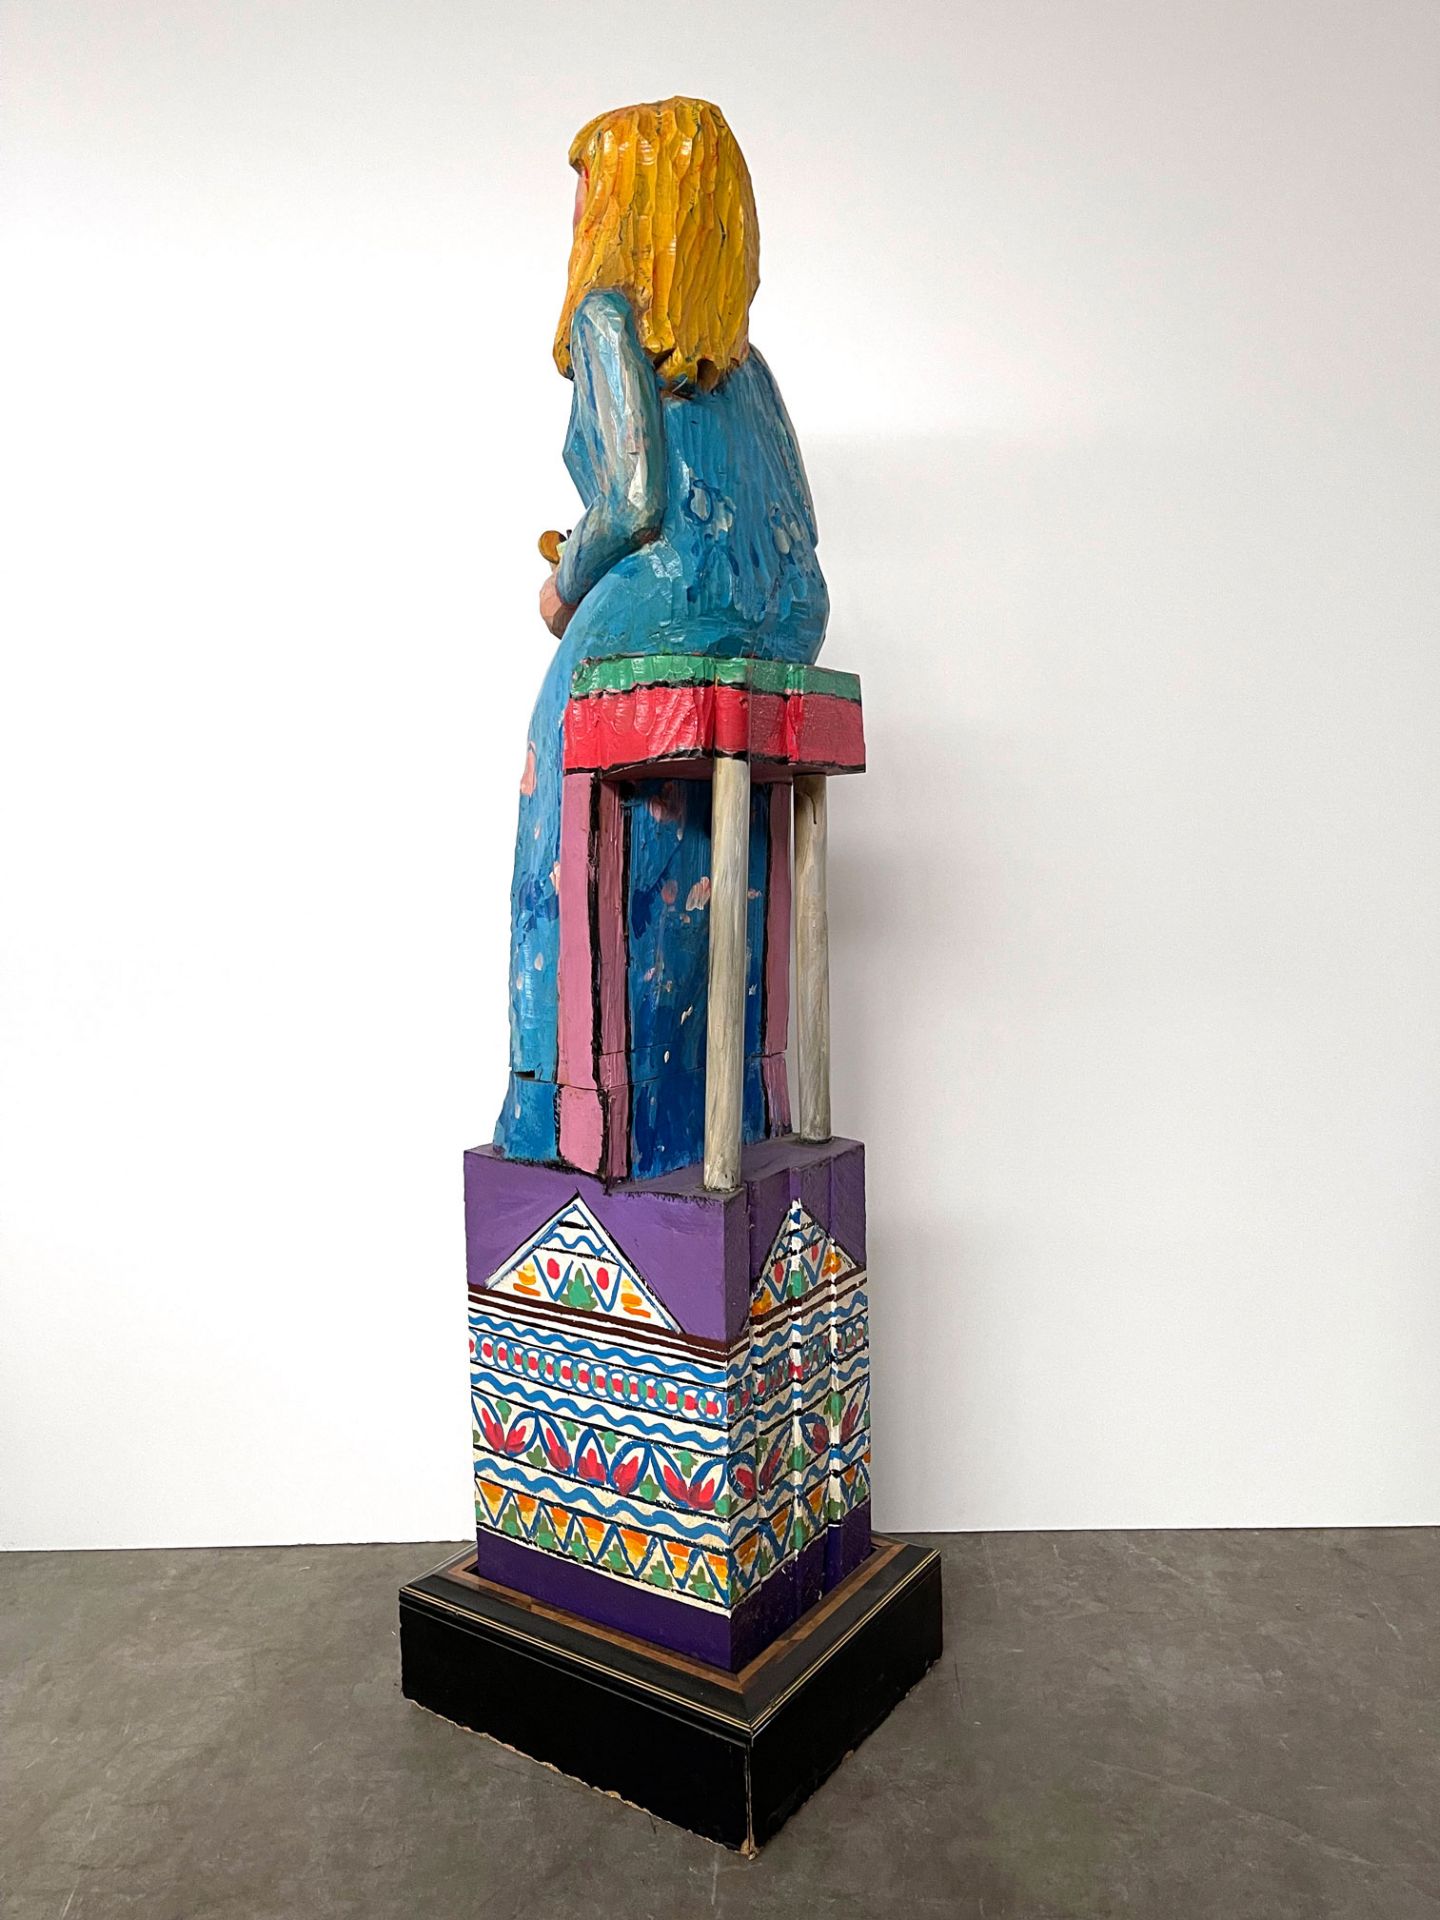 Wooden Statue Depicting a Woman on a Chair with Cocktail - Image 6 of 10